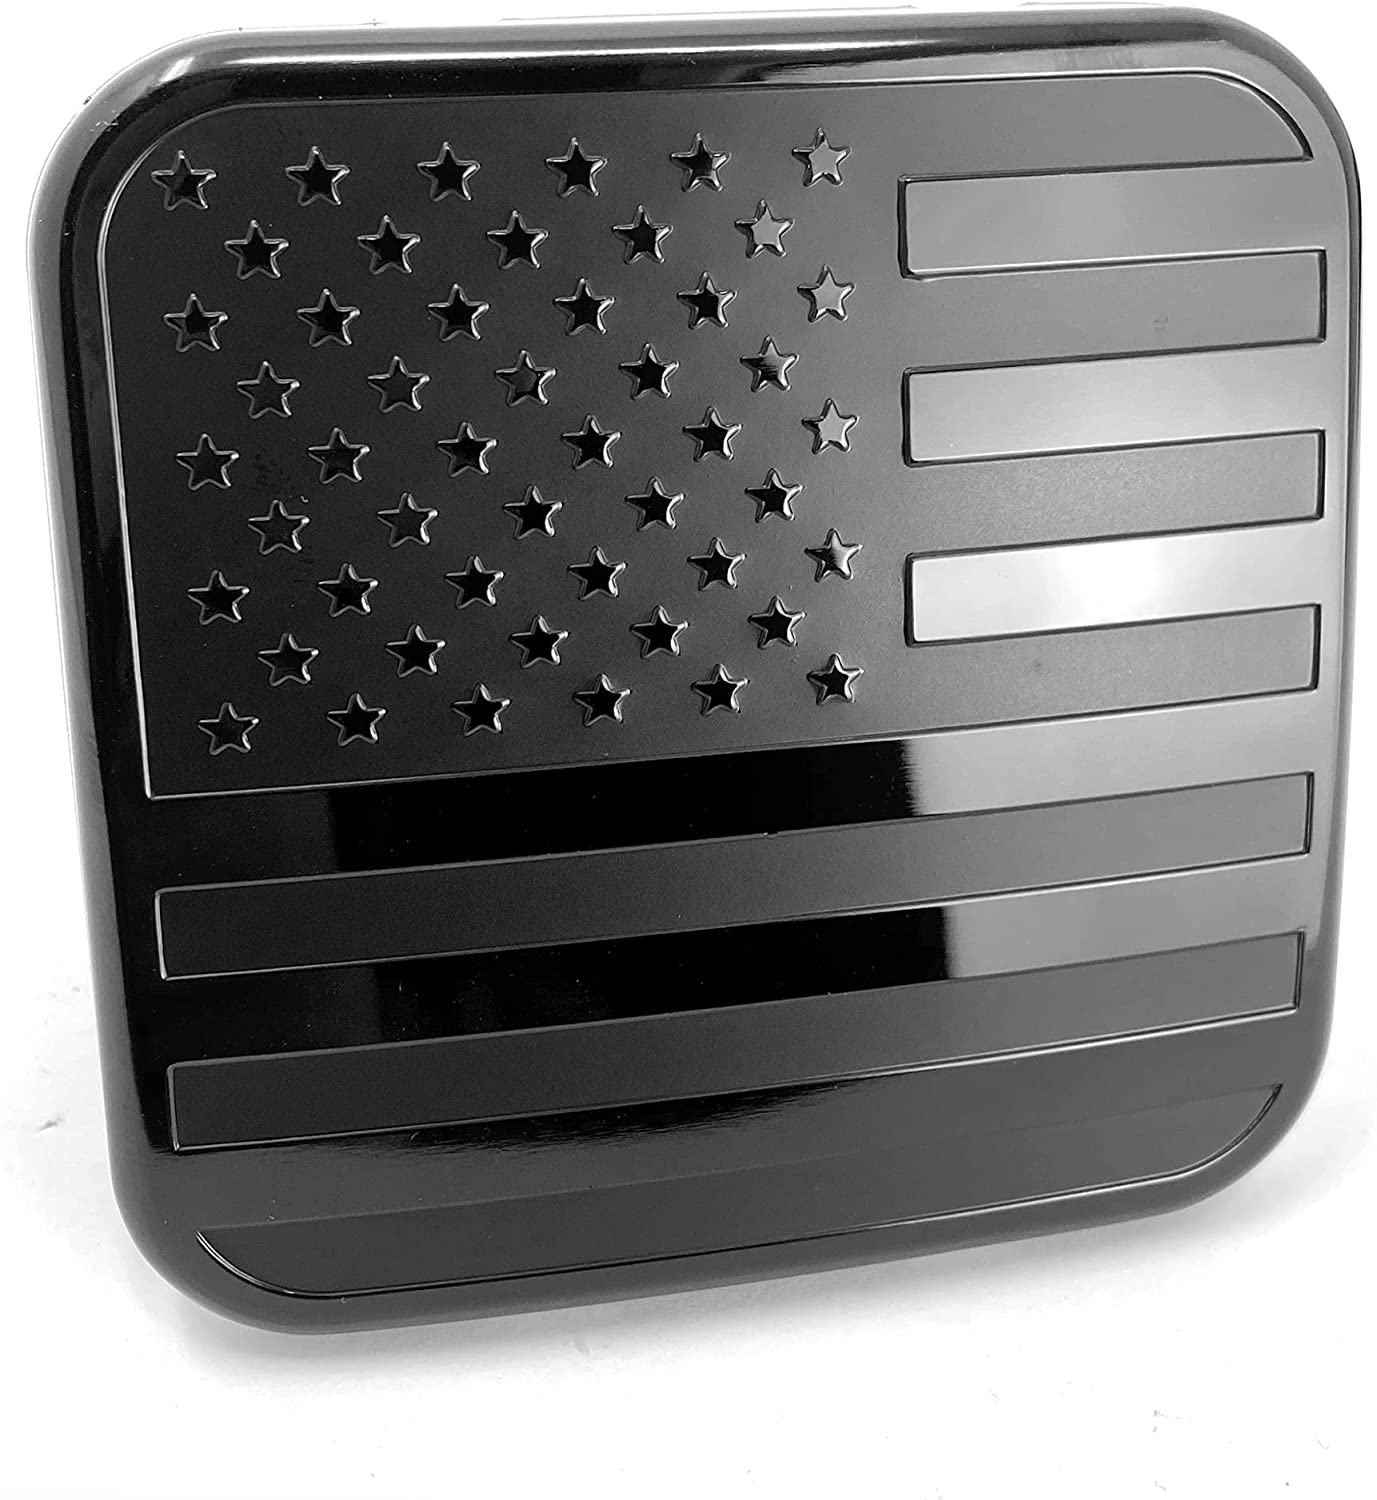 American Black Flag Hitch Cover Tube Plug for 1.25", 2" and 2.5" Hitch Receivers